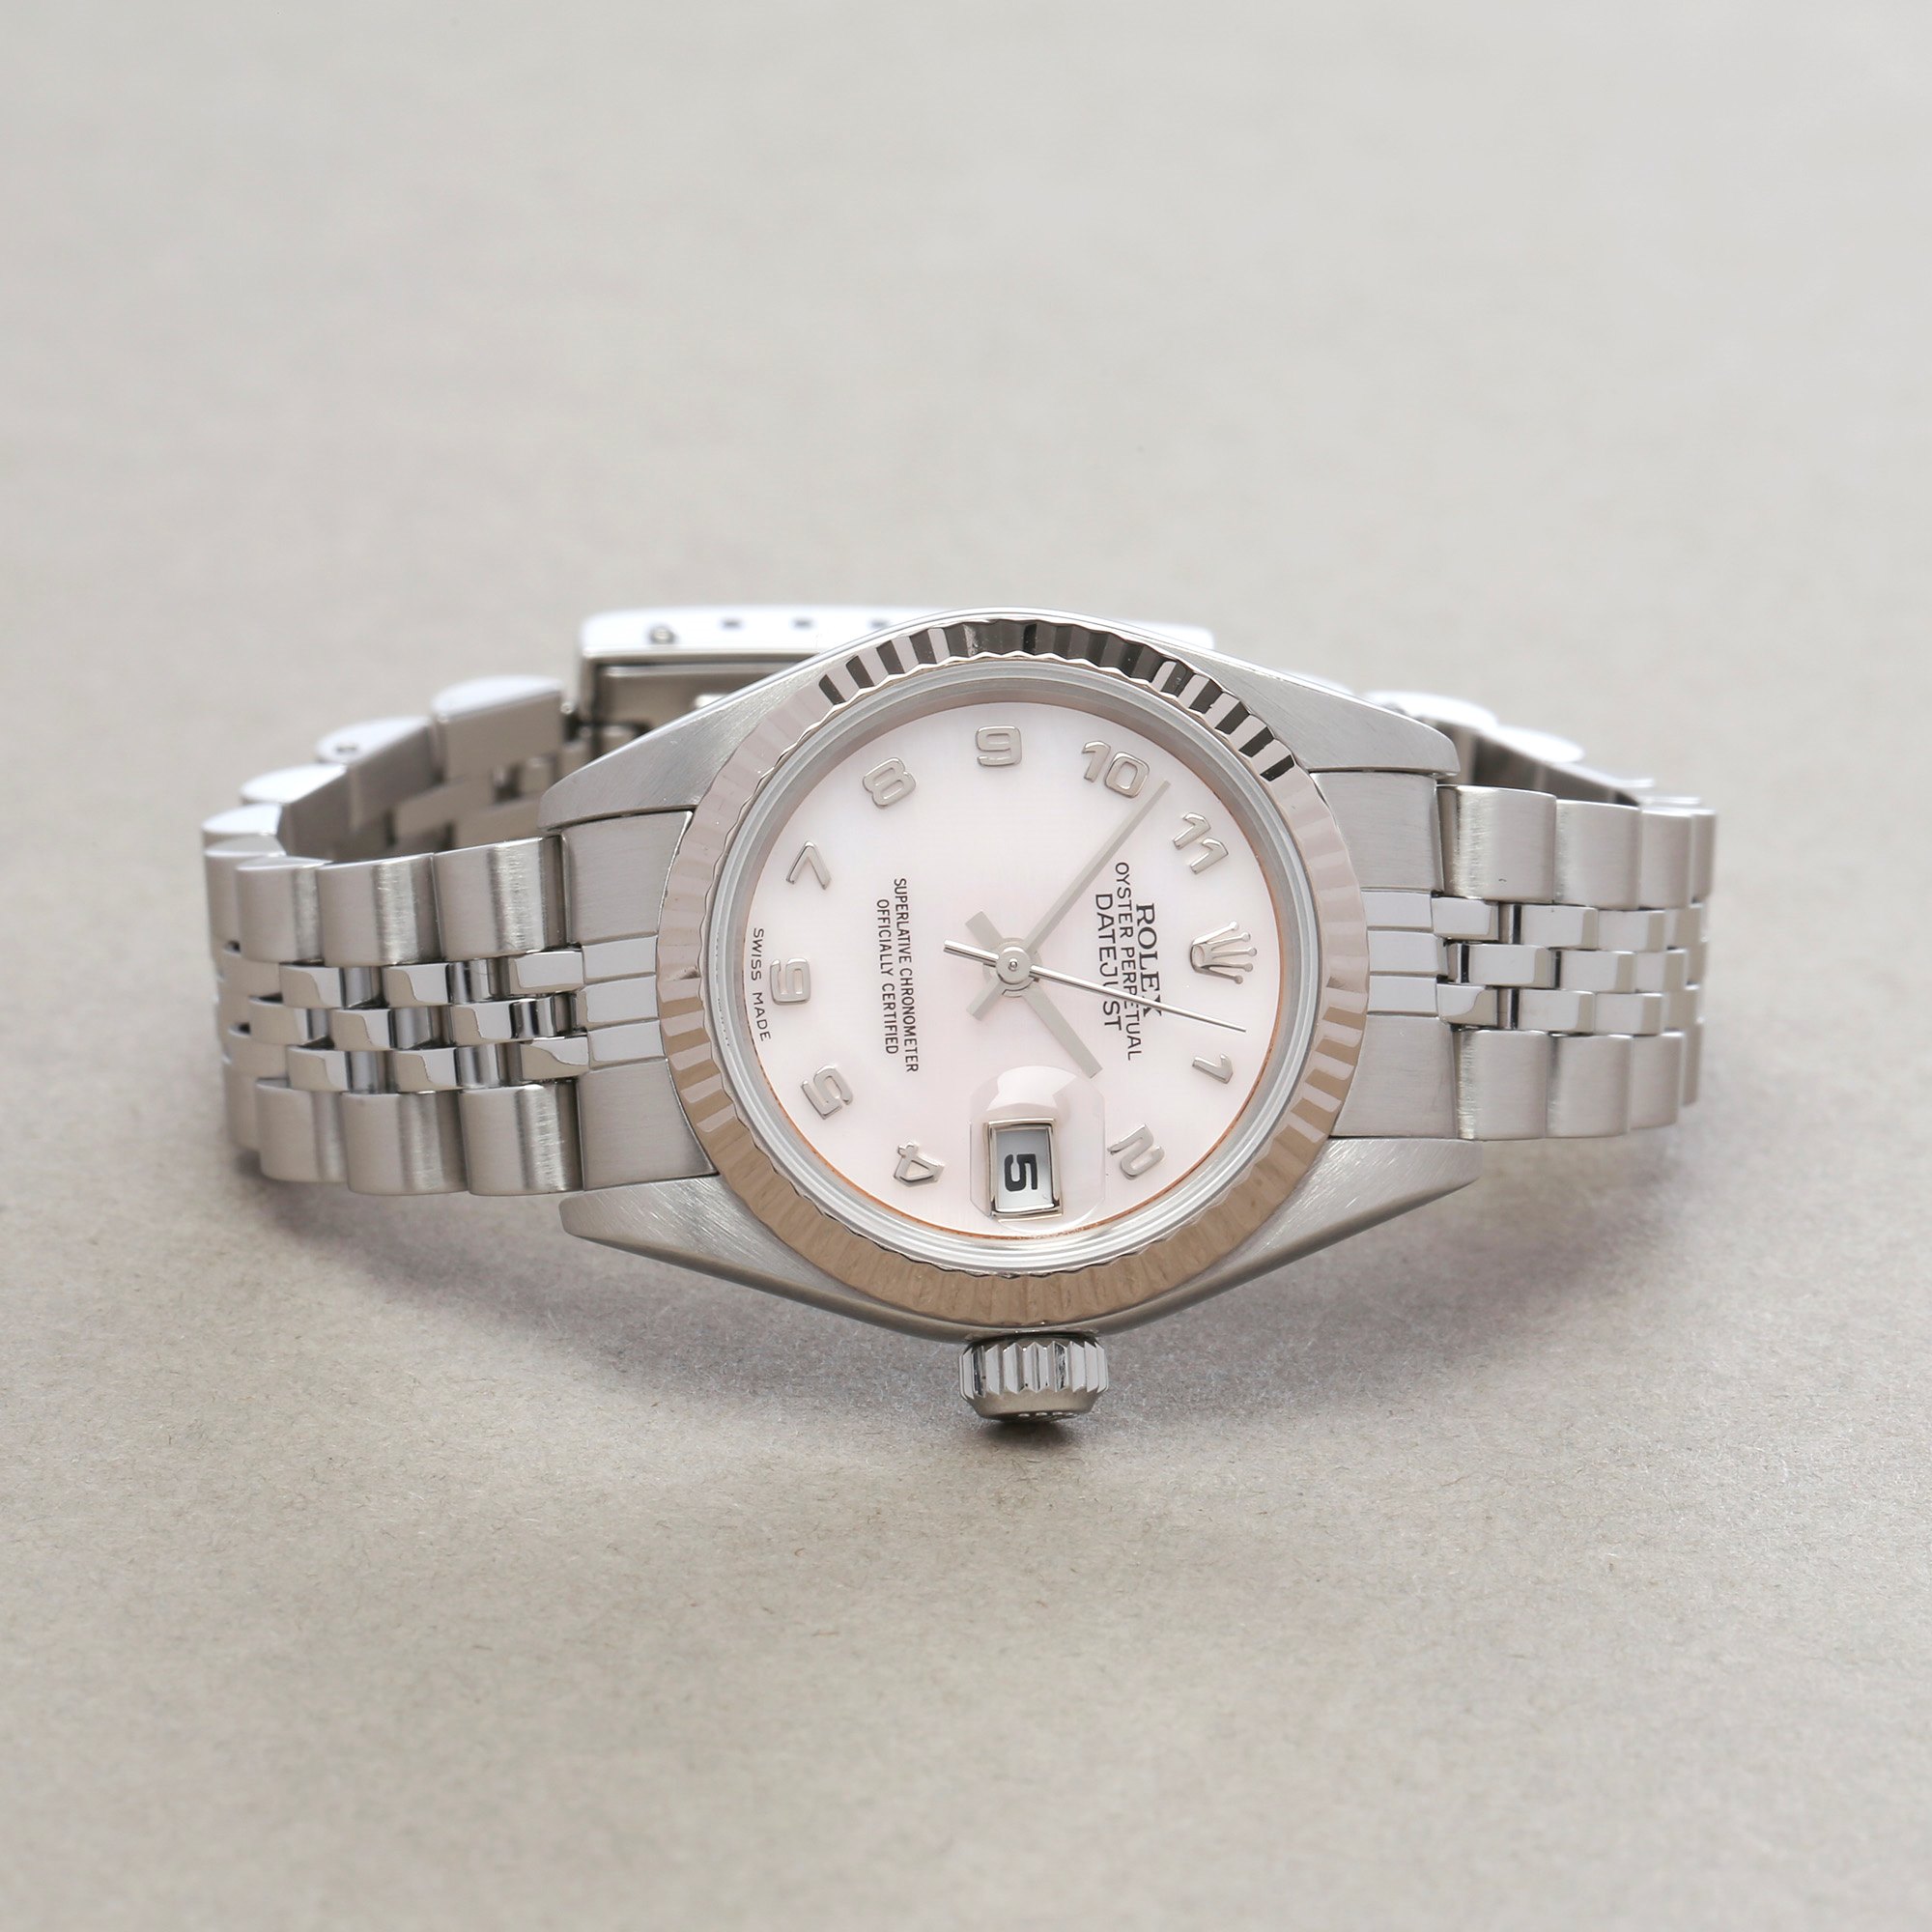 Rolex Datejust 26 White Gold & Stainless Steel 79174